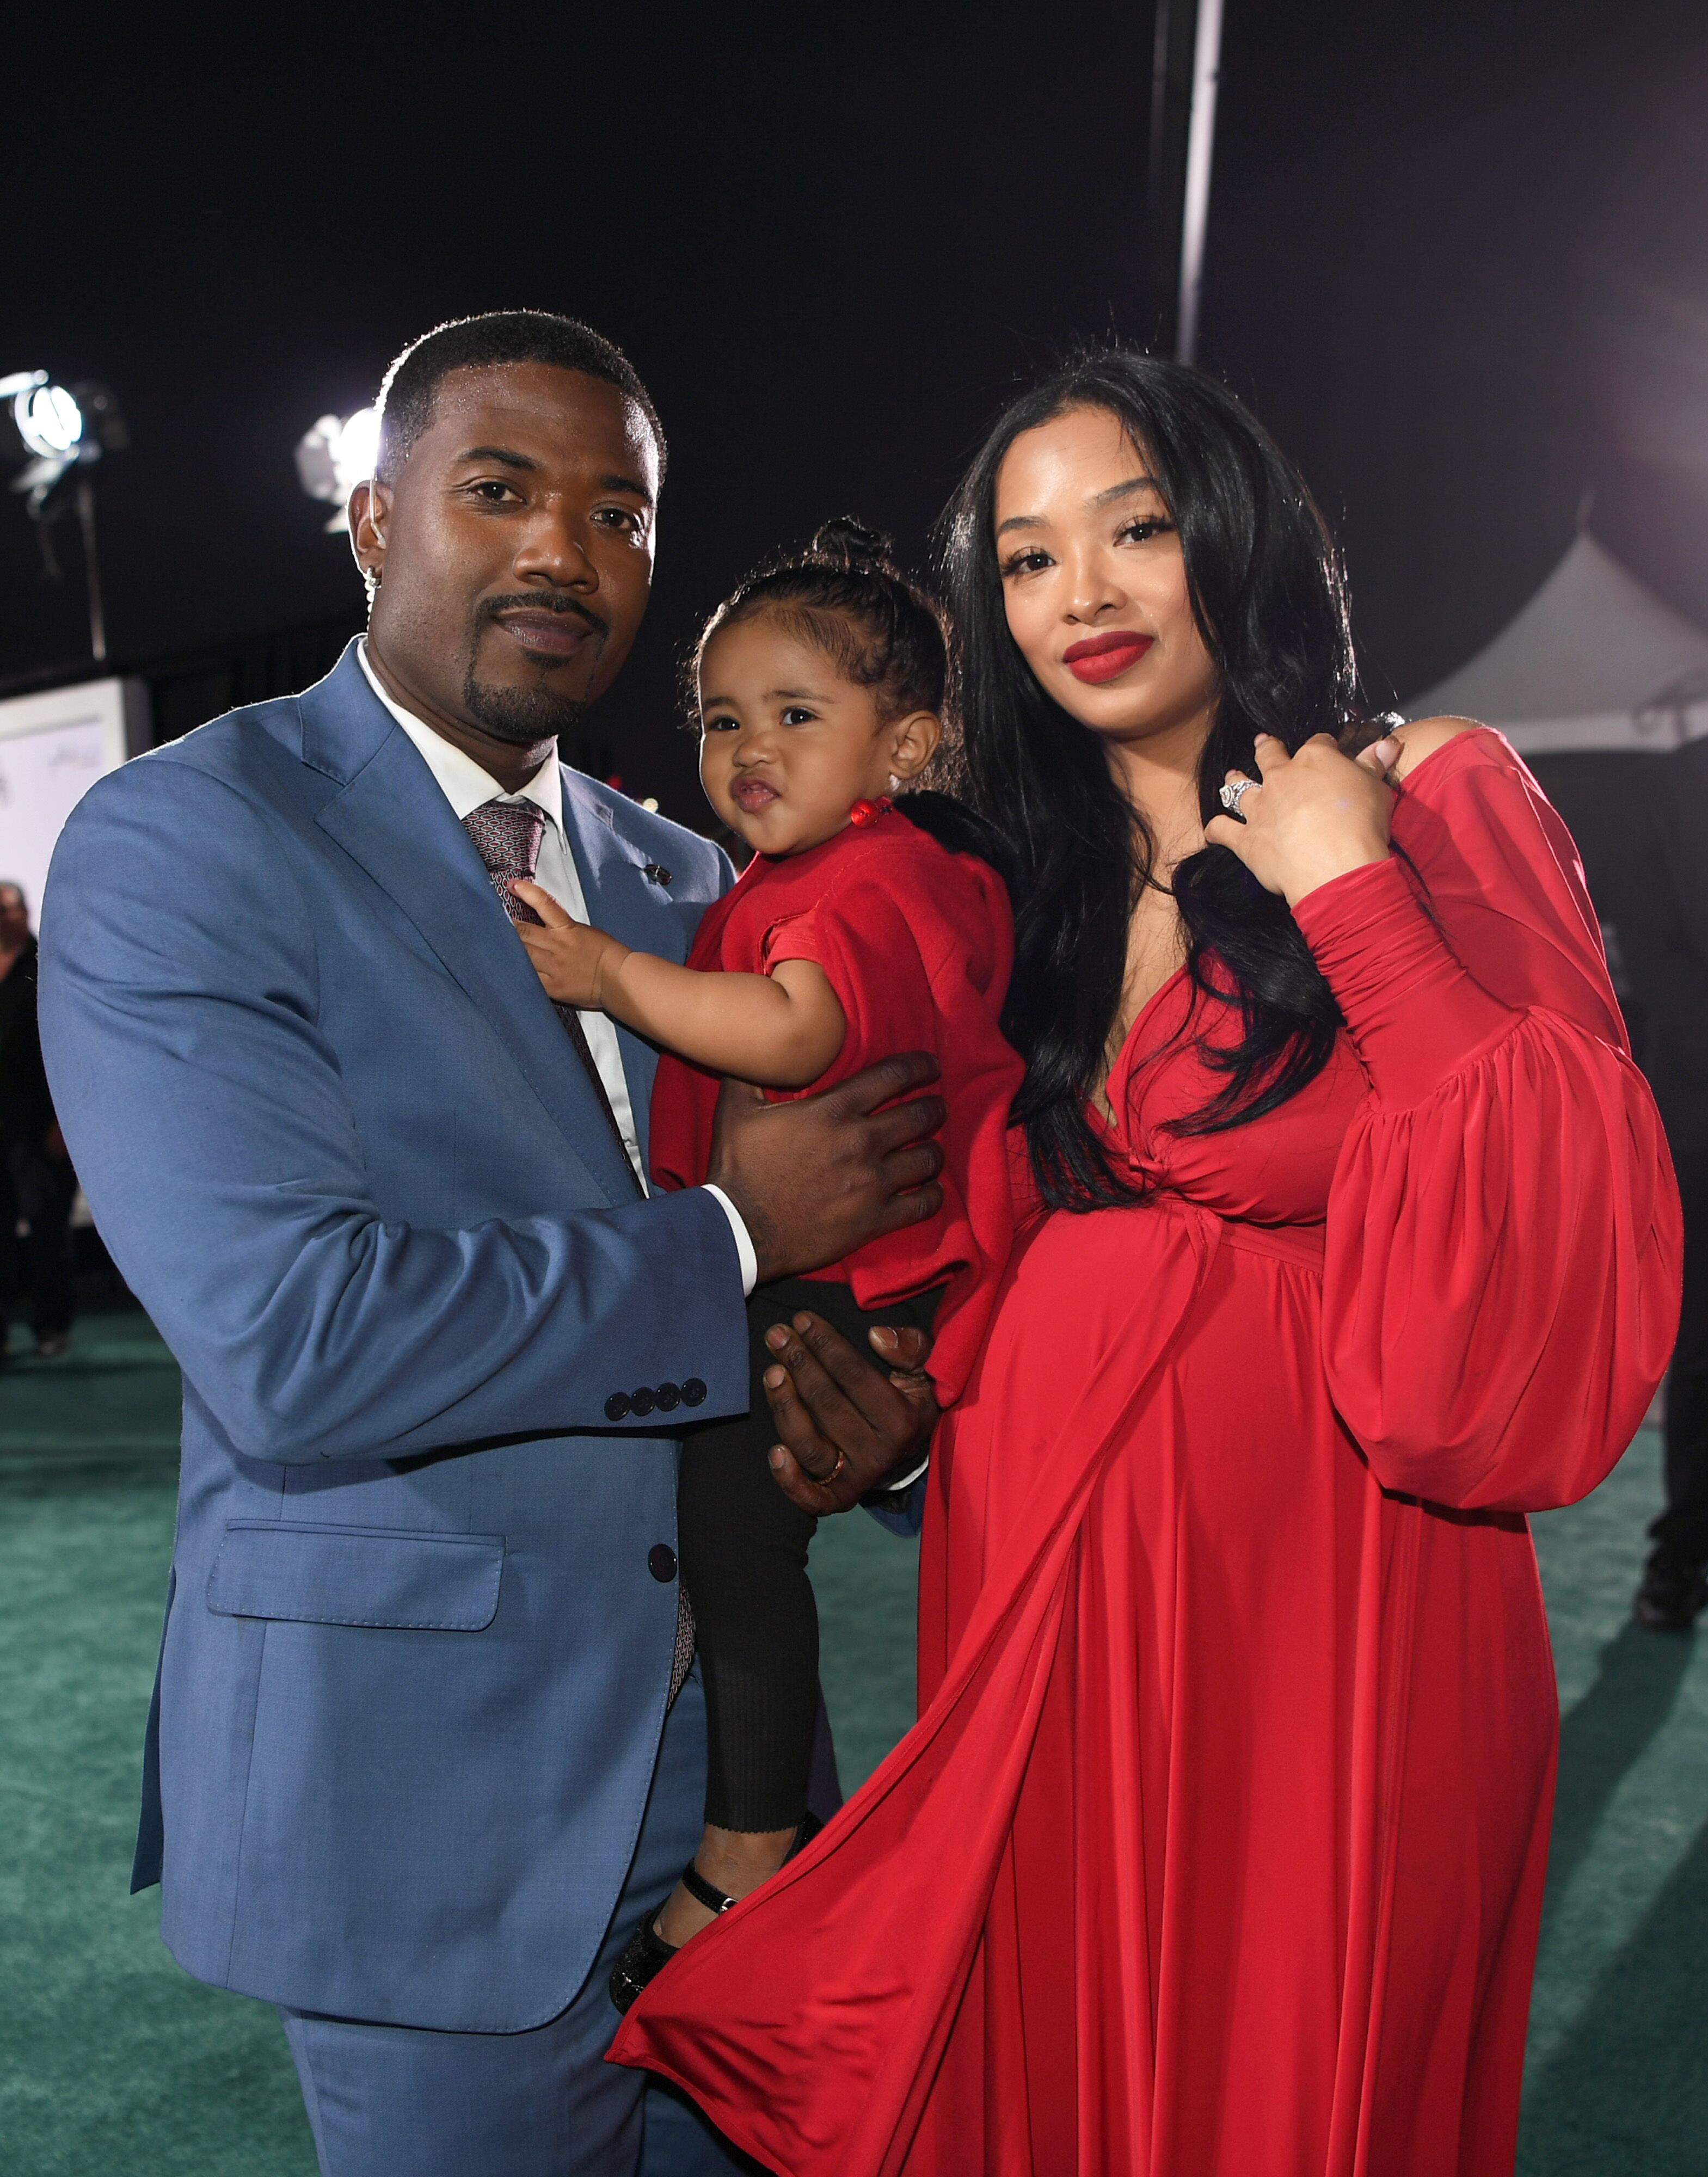 The Norwood family at the 2019 Soul Train Music Awards/ Source: Getty Images